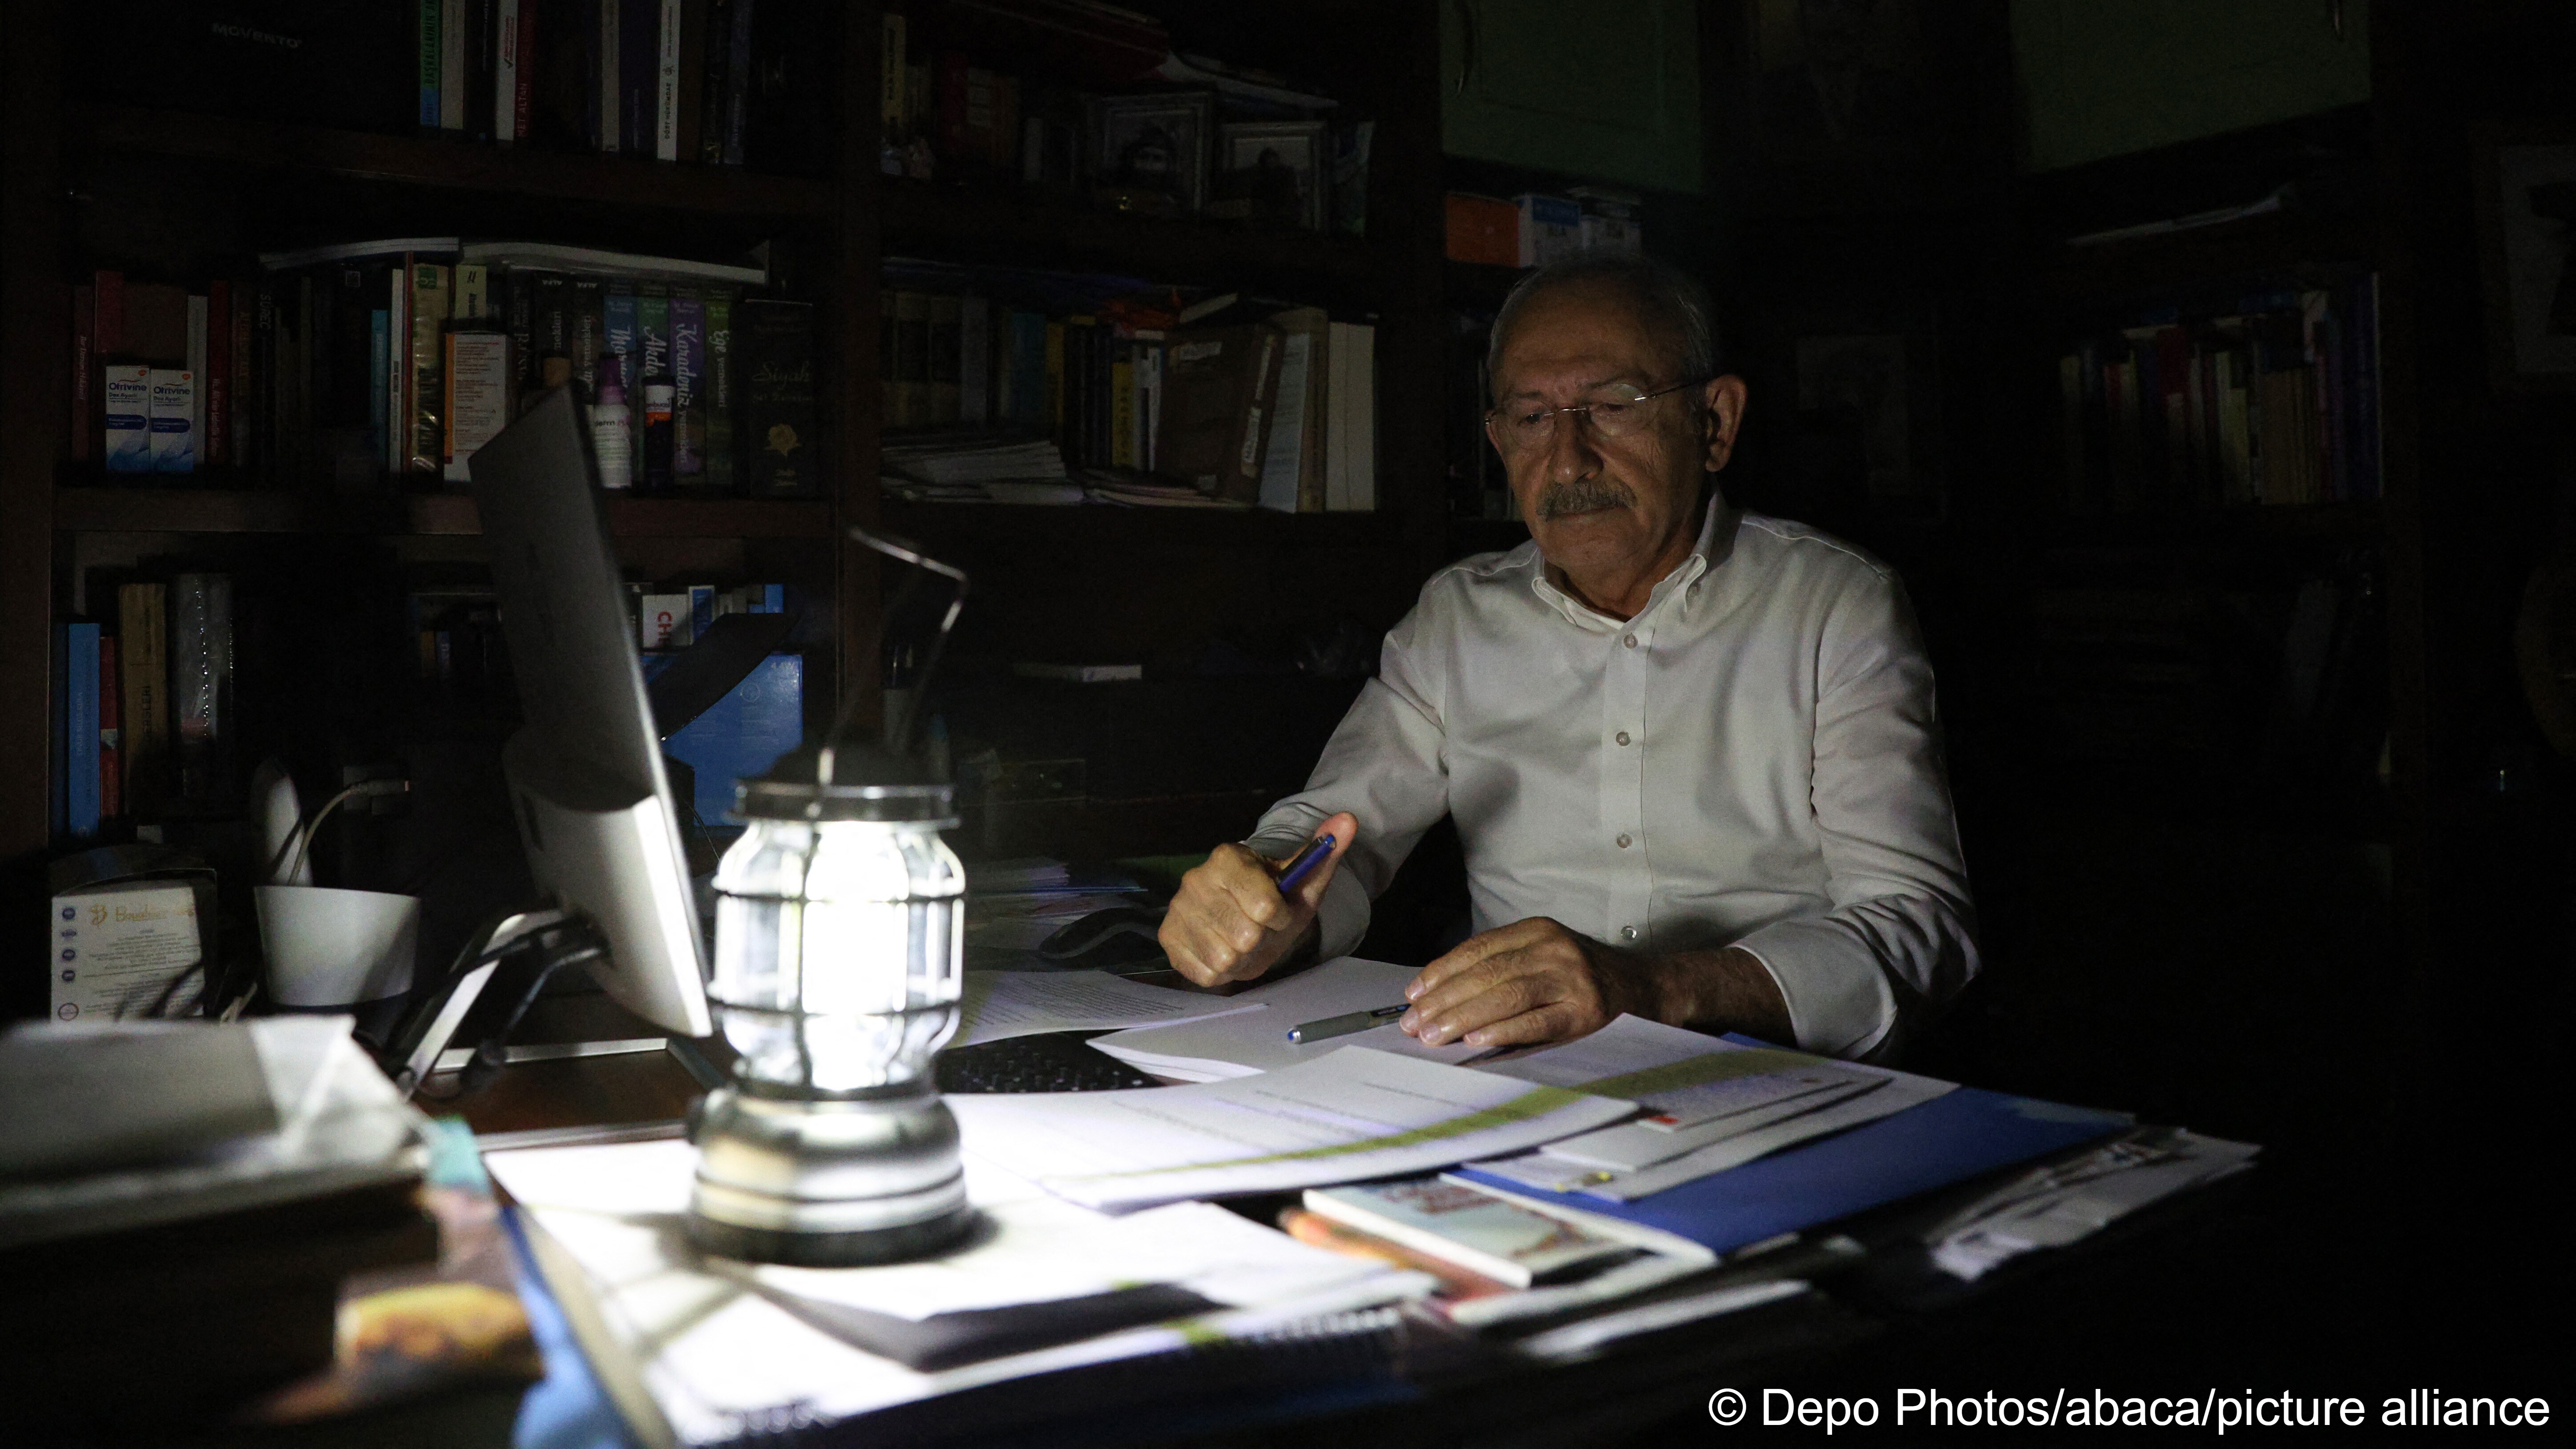 Kemal Kilicdaroglu stopped paying his electricity bills in solidarity with struggling Turks (image; ALP EREN KAYA / REPUBLICAN PEOPLES PARTY PRESS OFFICE/AFP)